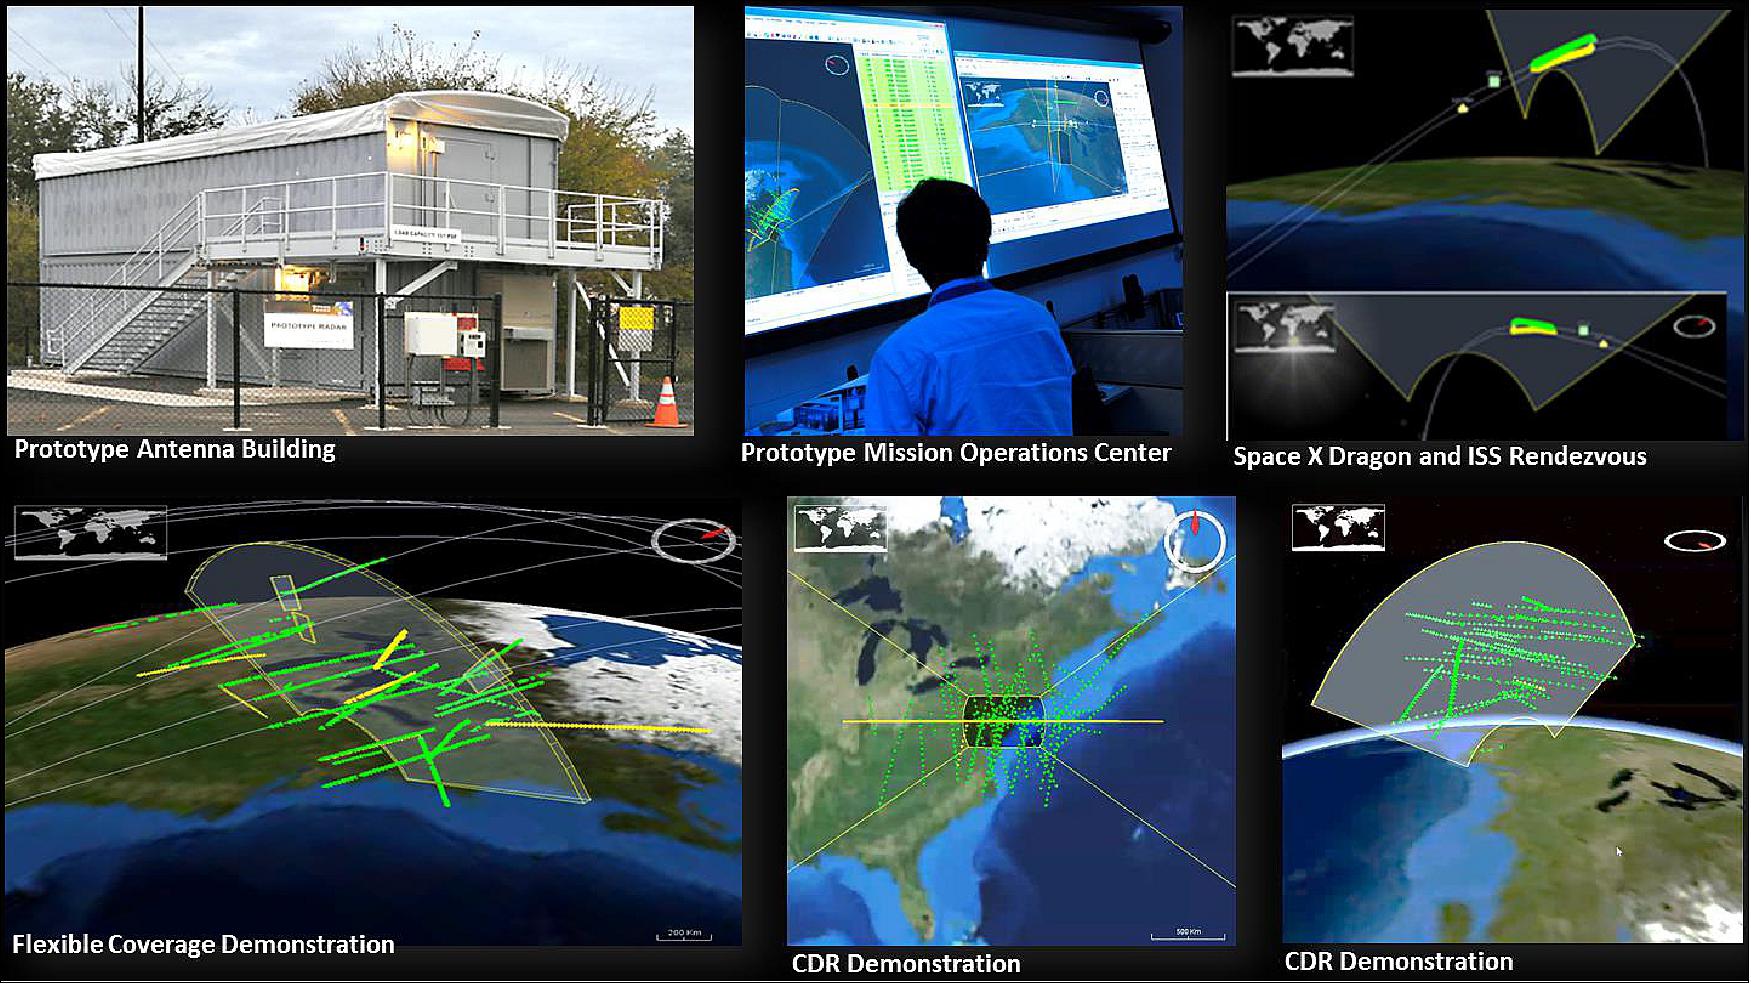 Figure 20: A successful end-to-end prototype demonstration was conducted at CDR in March 2015 (image credit: Lockheed Martin)